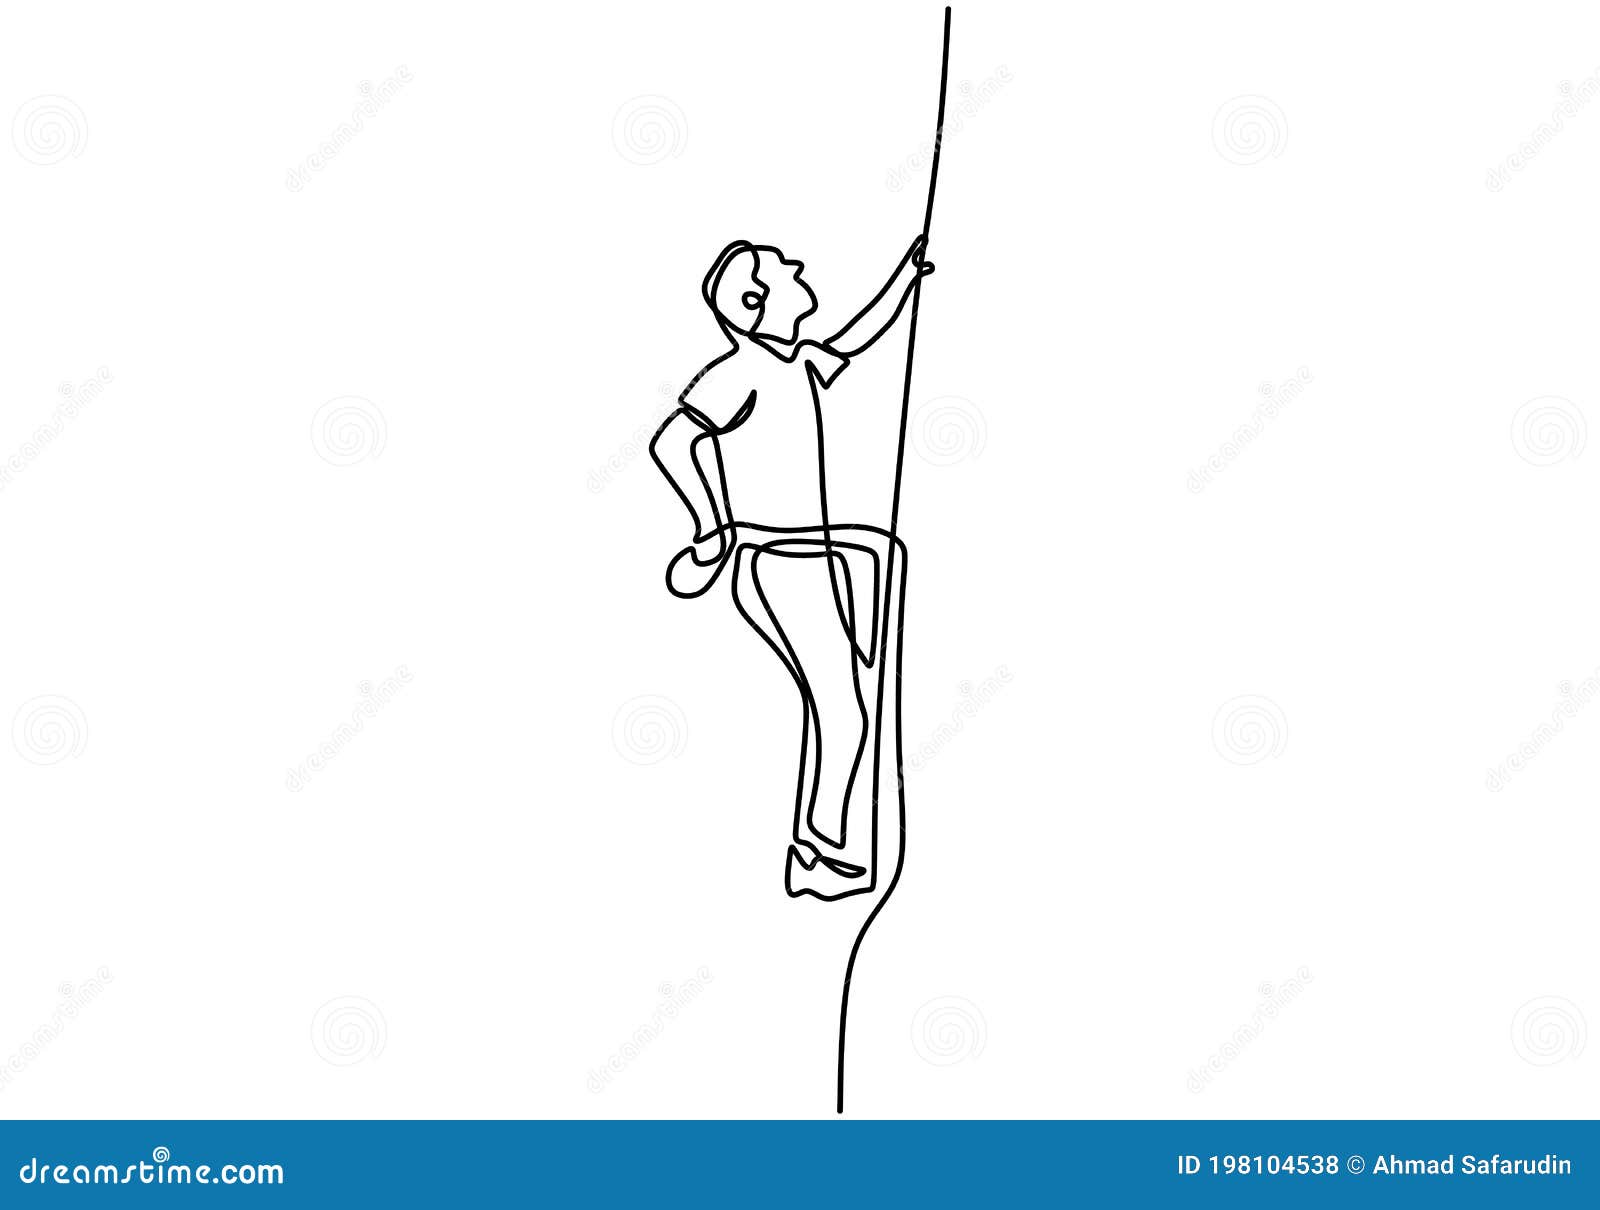 Continuous One Line Drawing of Man Doing Climbing. Energetic Young Male  Practices Rock Climbing the Rope for Safety Isolated on Stock Vector -  Illustration of drawing, contour: 198104538